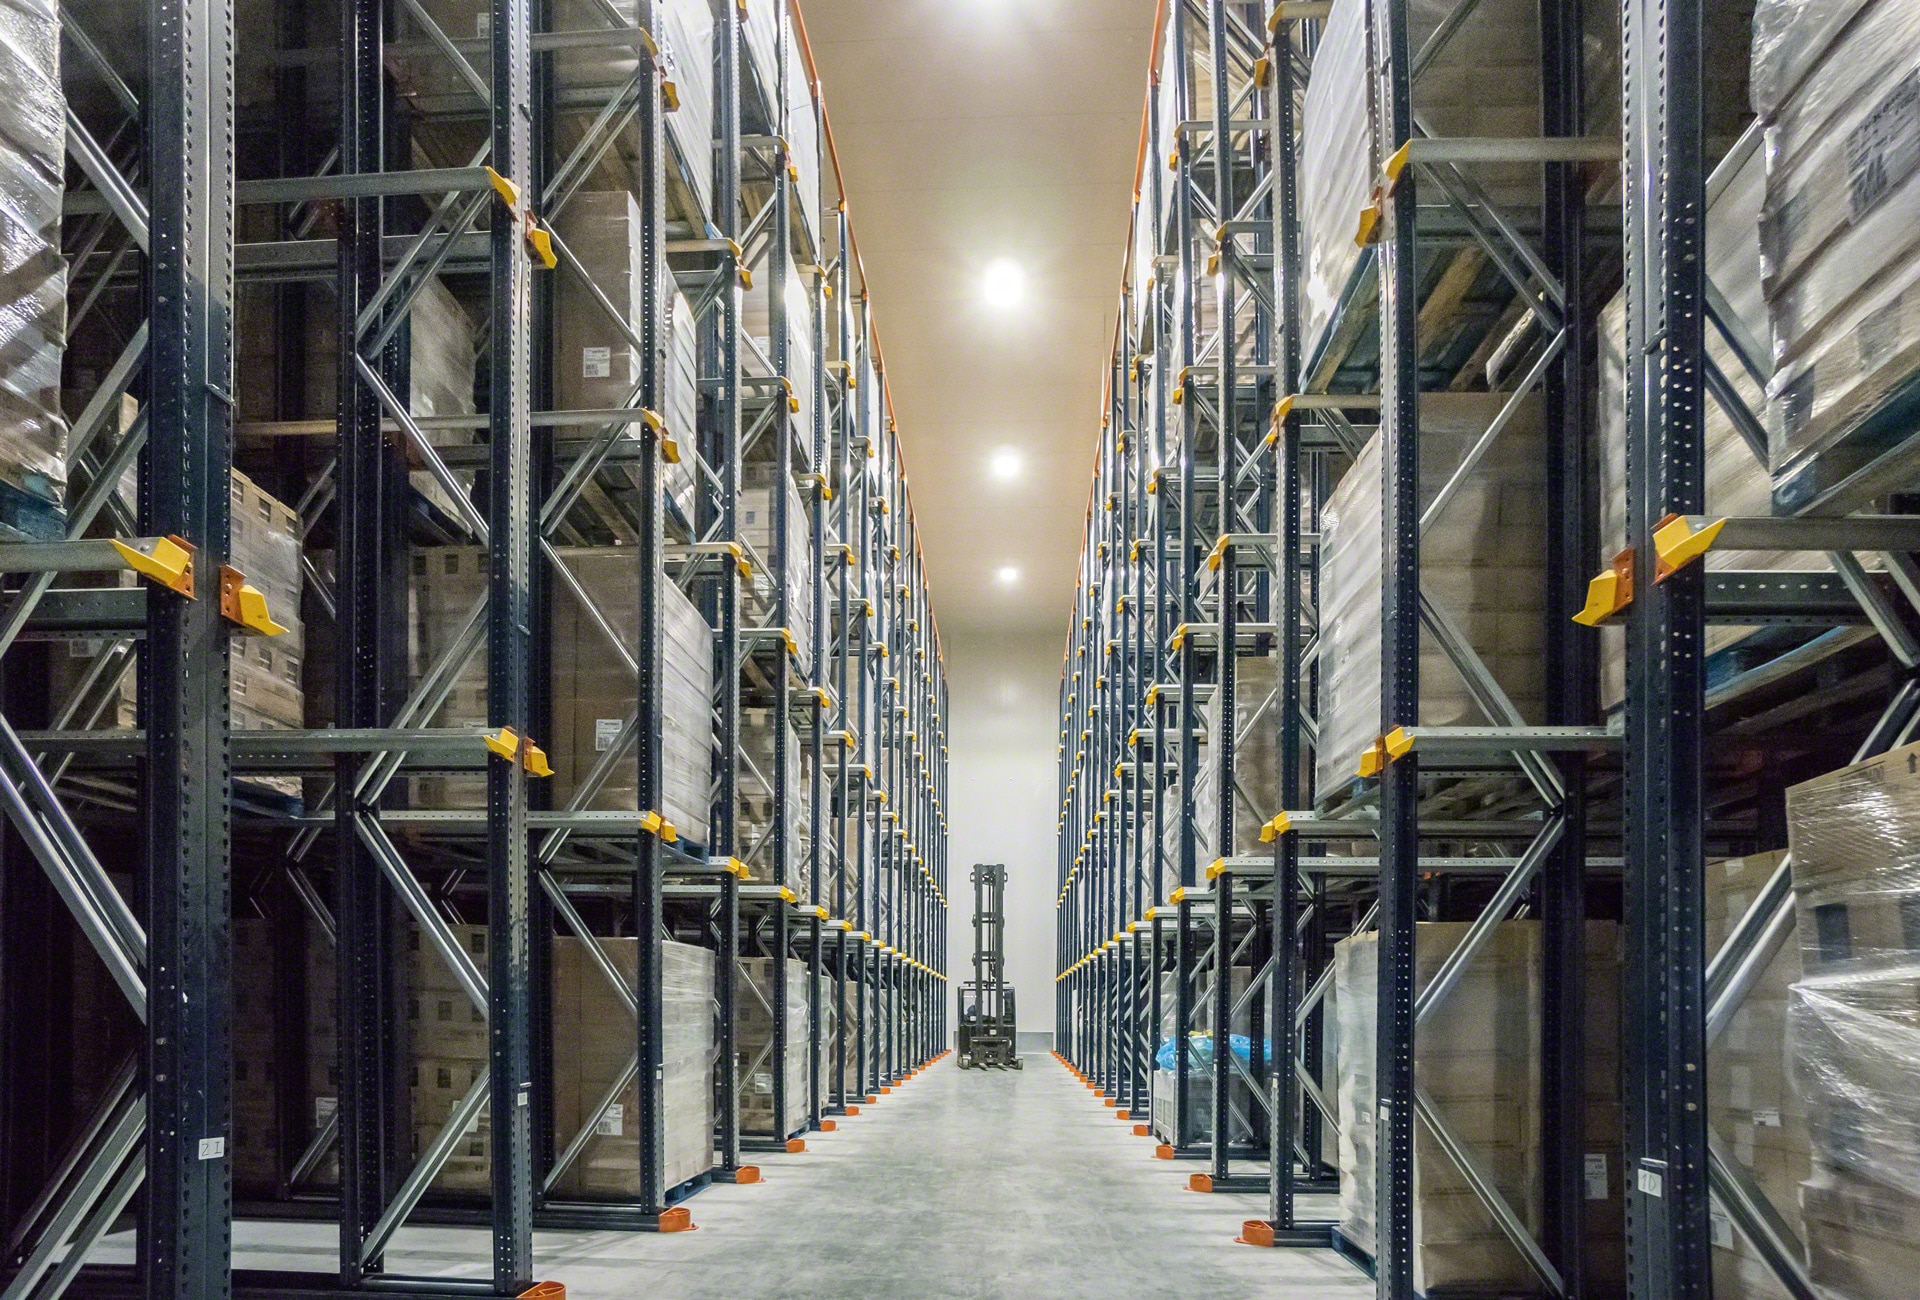 The drive-in system uses the maximum capacity of the warehouse, a key factor in cold-storage